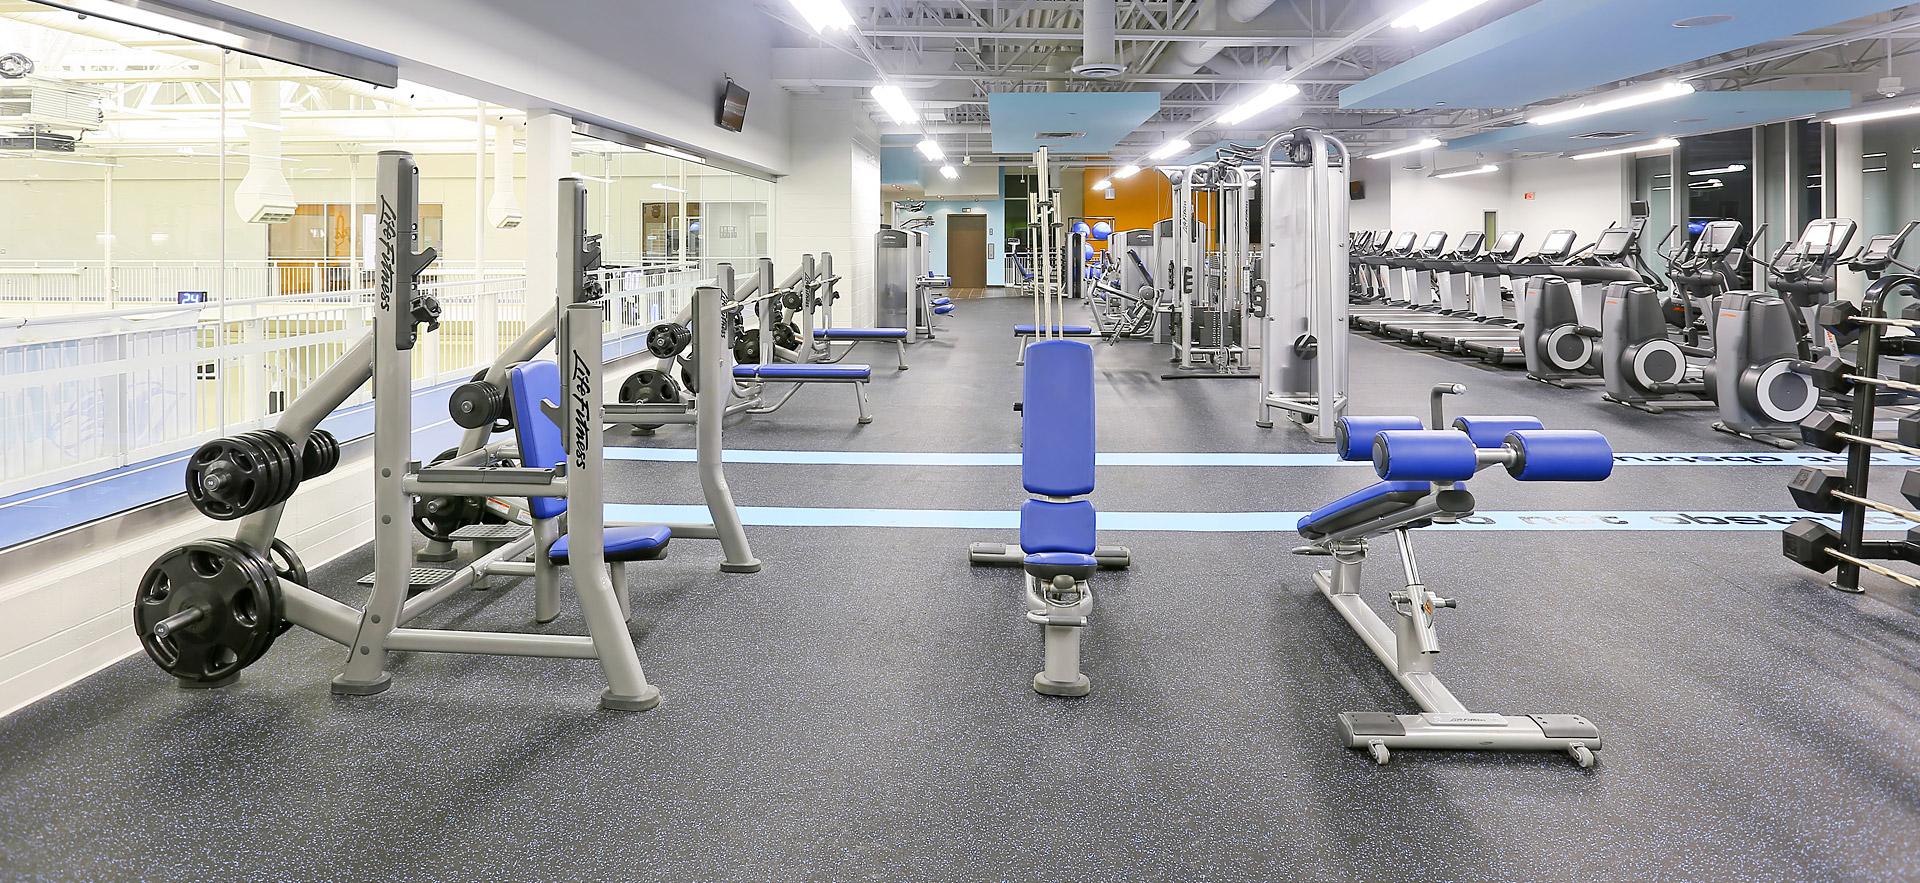 Interior view of the ˾ Fitness area.